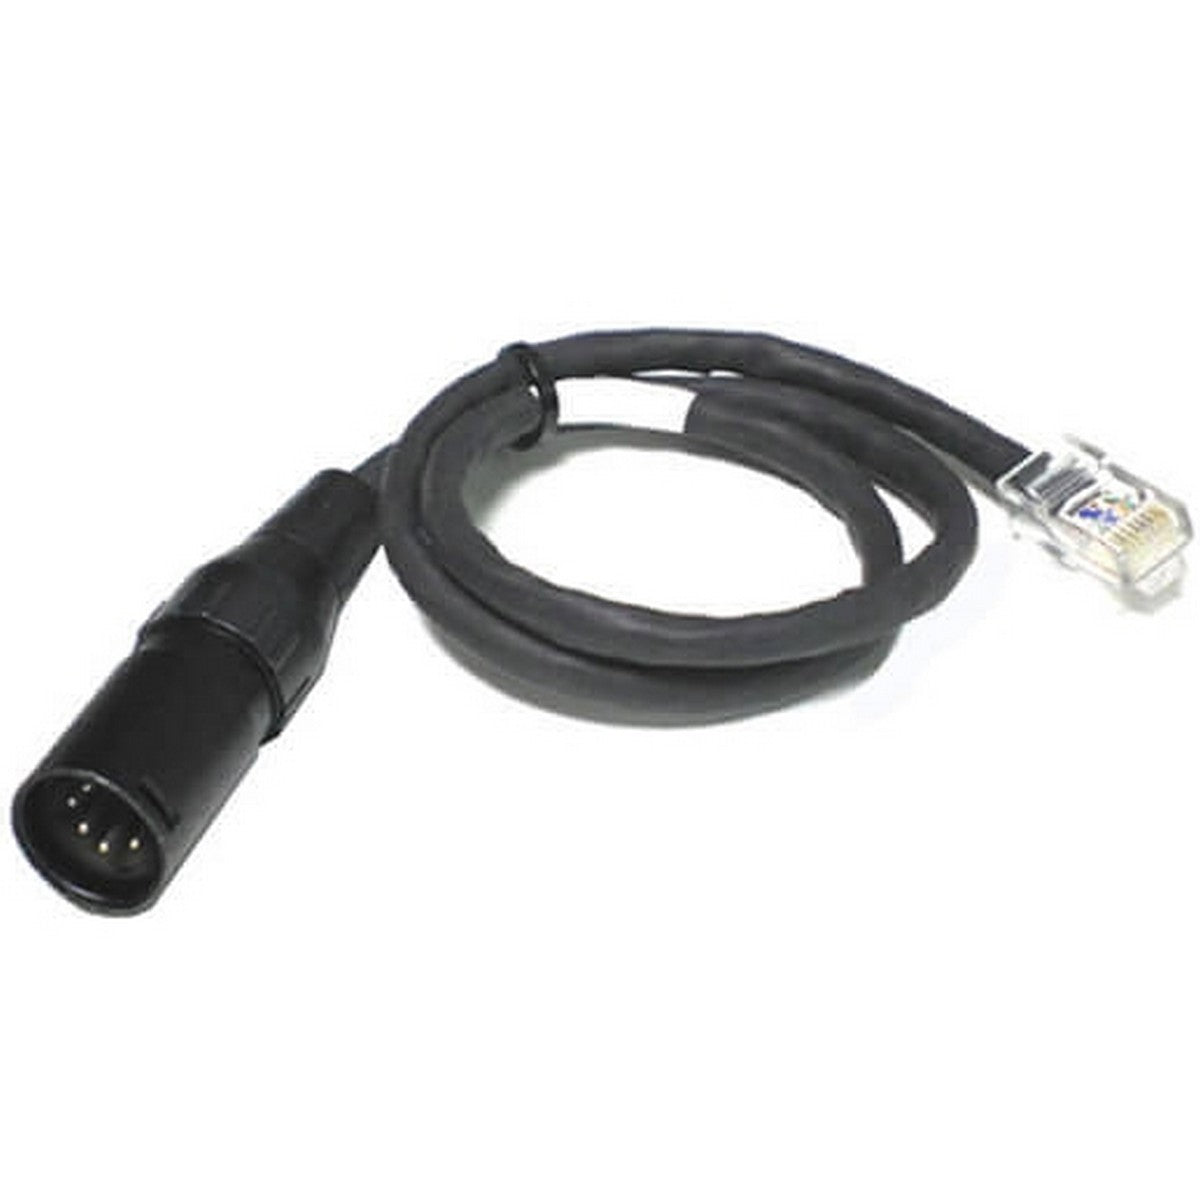 Litepanels RJ45 to 5 Pin XLR Male Conversion Cable | DMX from 5 Pin XLR to RJ-45 Converting Cable 900-0006